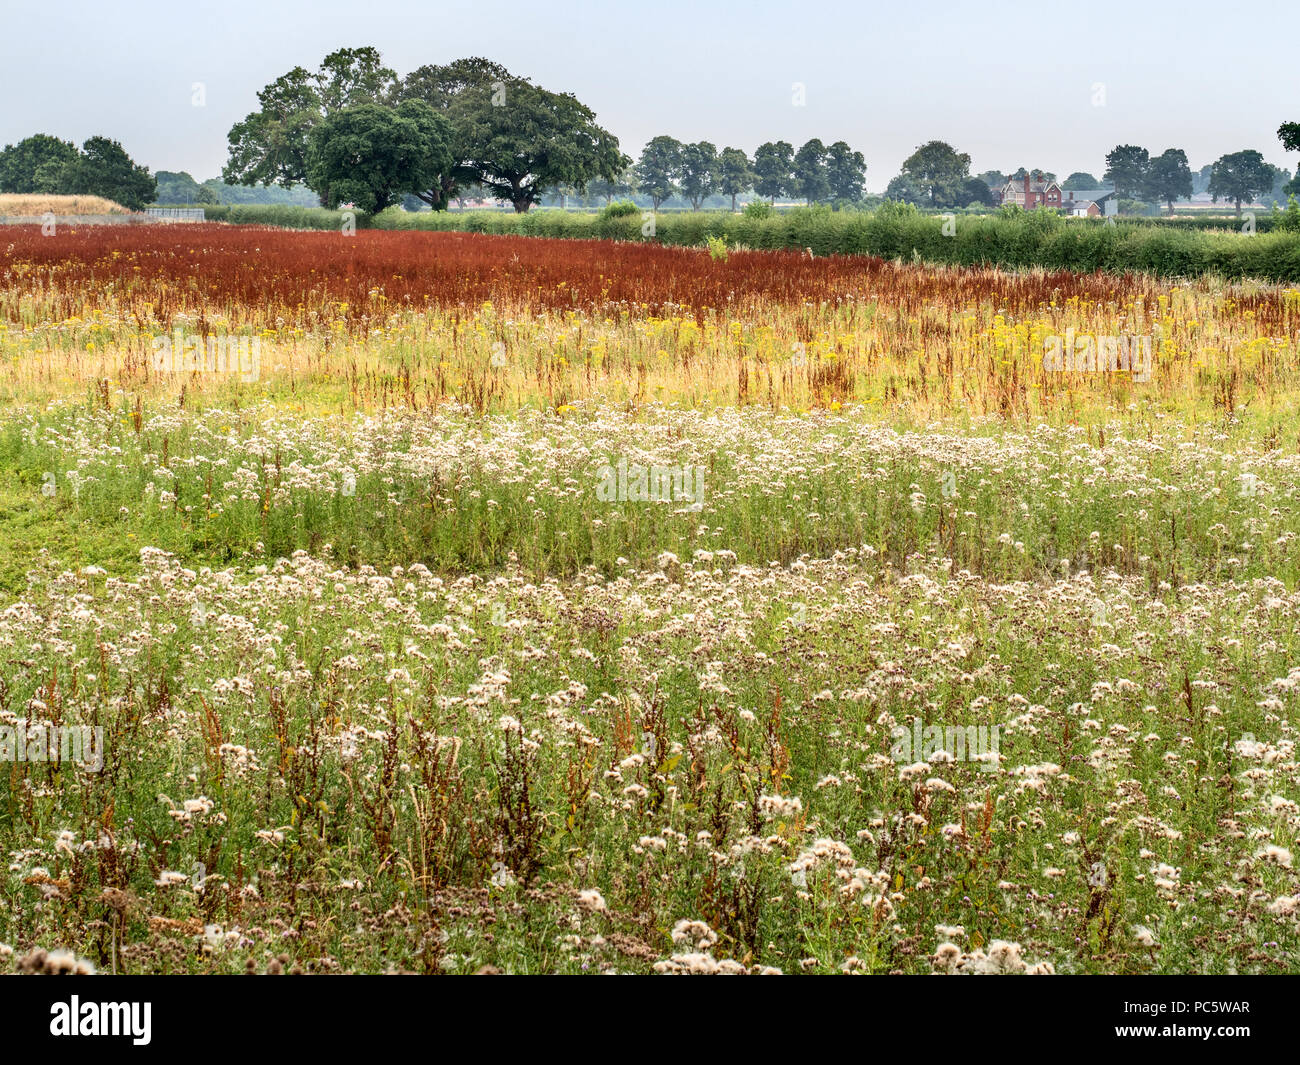 Meadow with gone to seed dock plants ragworthand thistles near Naburn City of York Yorkshire England Stock Photo